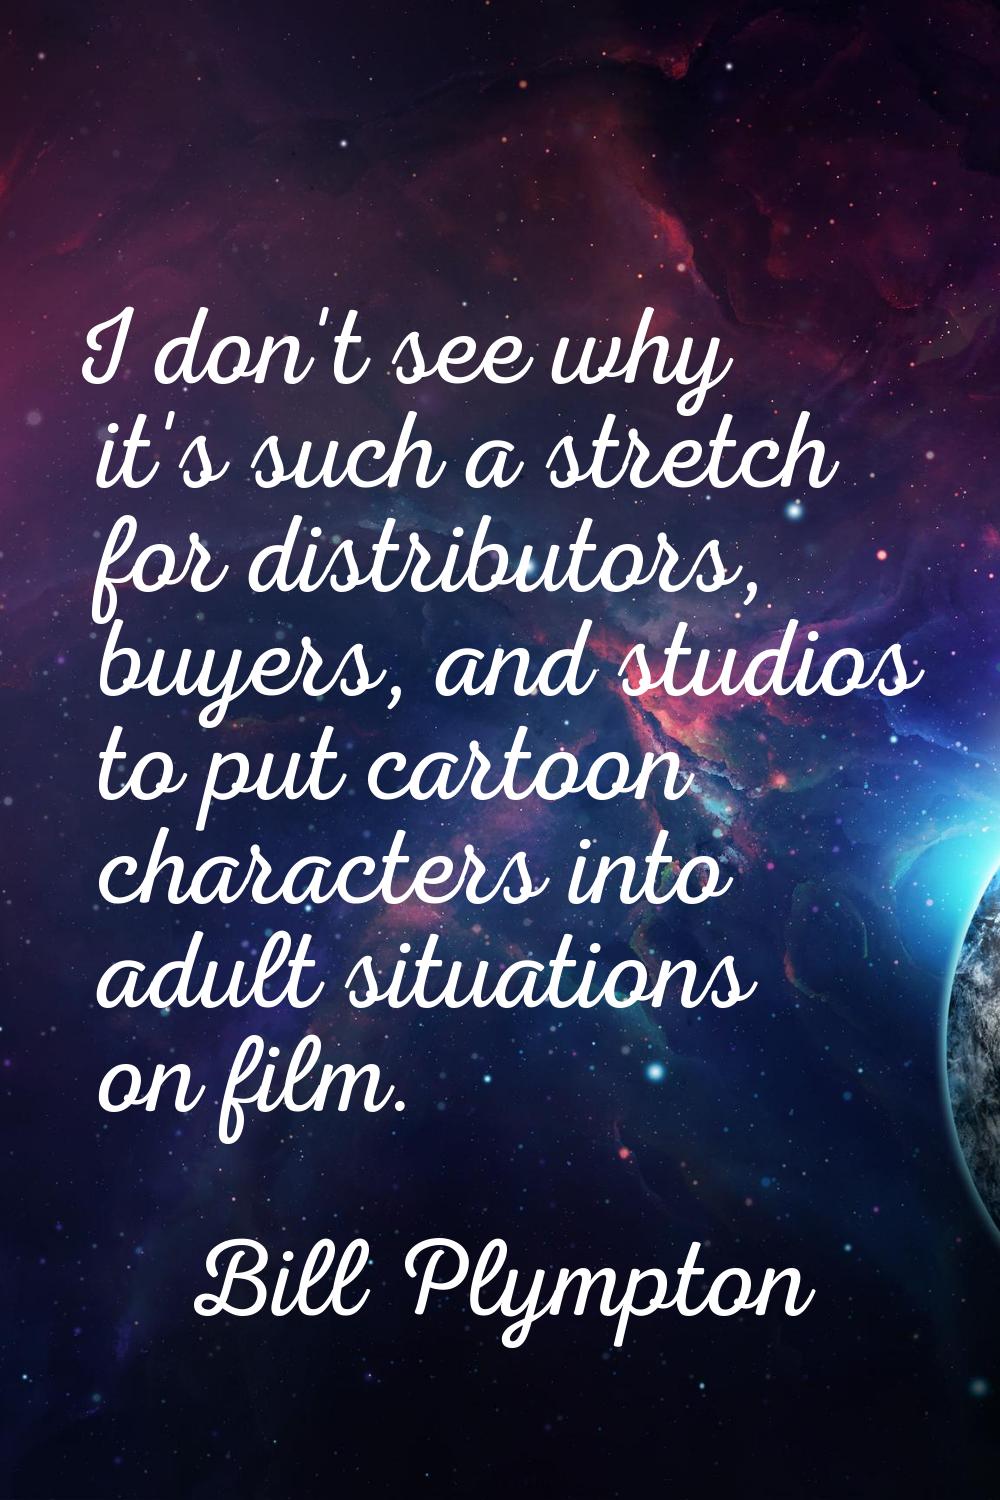 I don't see why it's such a stretch for distributors, buyers, and studios to put cartoon characters